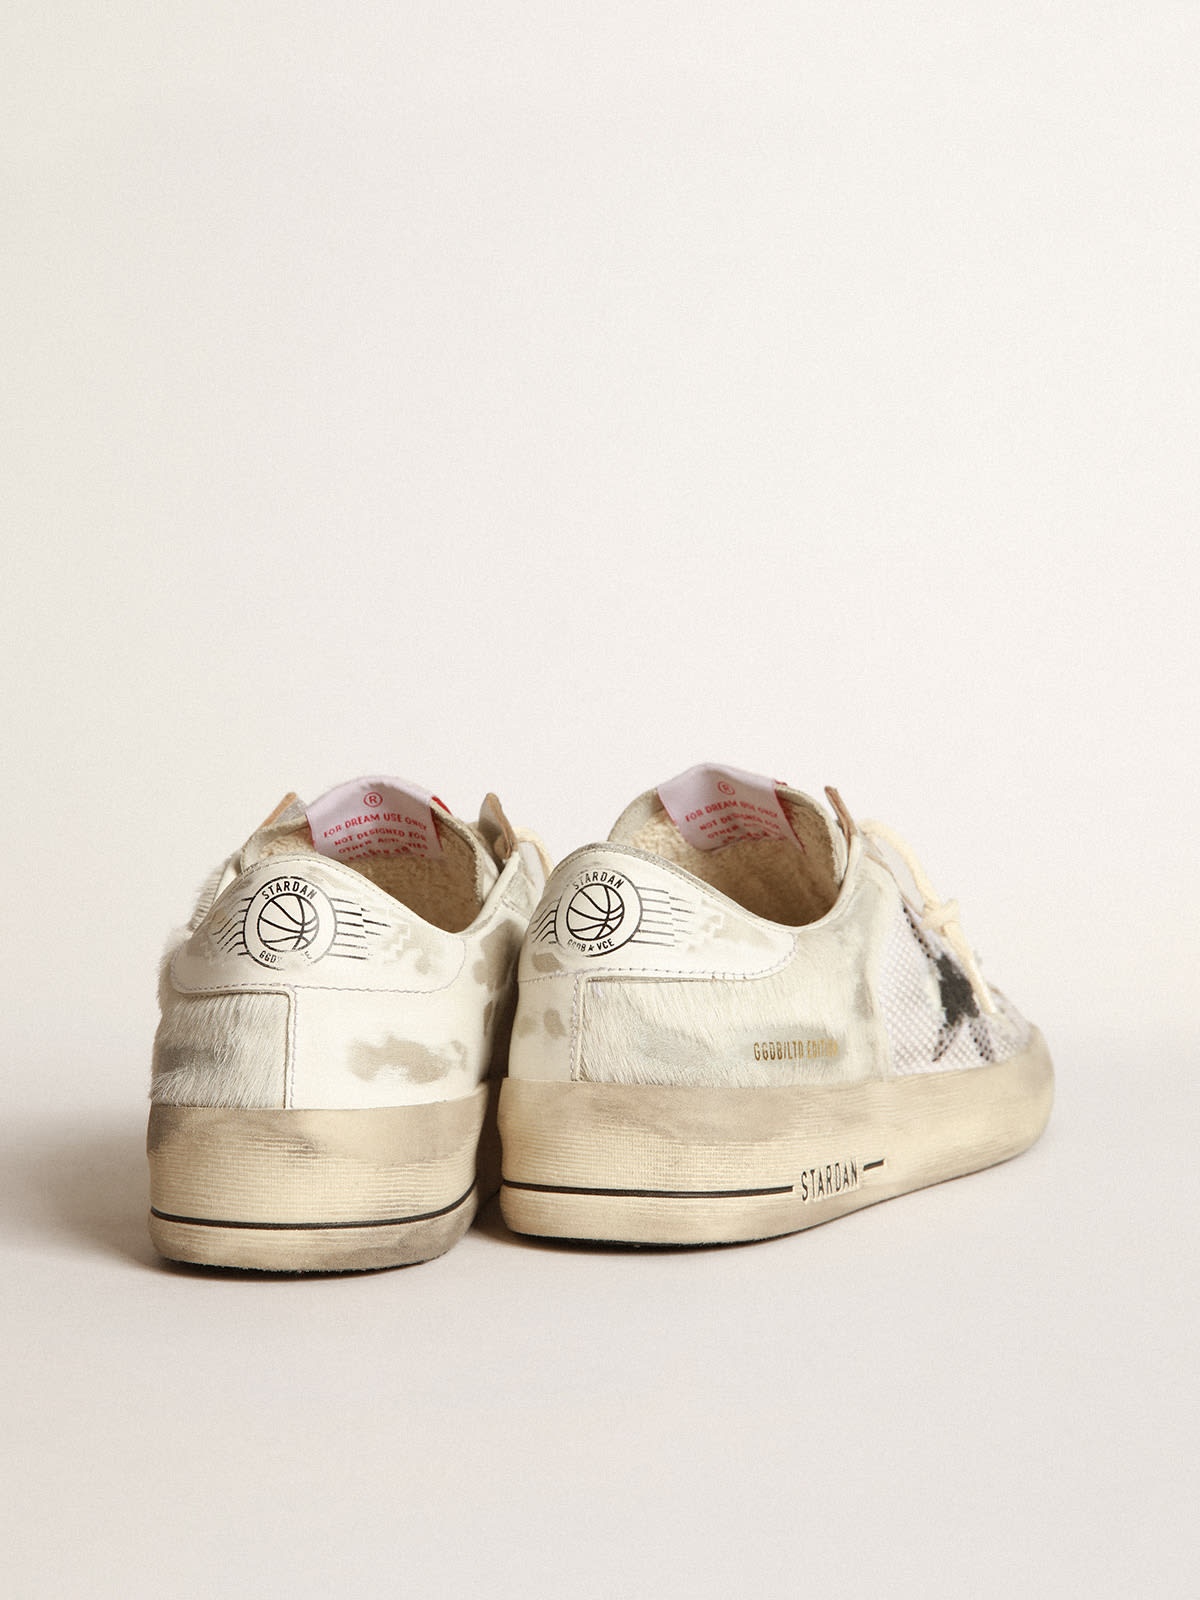 Golden Goose Stardan LAB sneakers in white pony skin and leather with black  suede star | REVERSIBLE